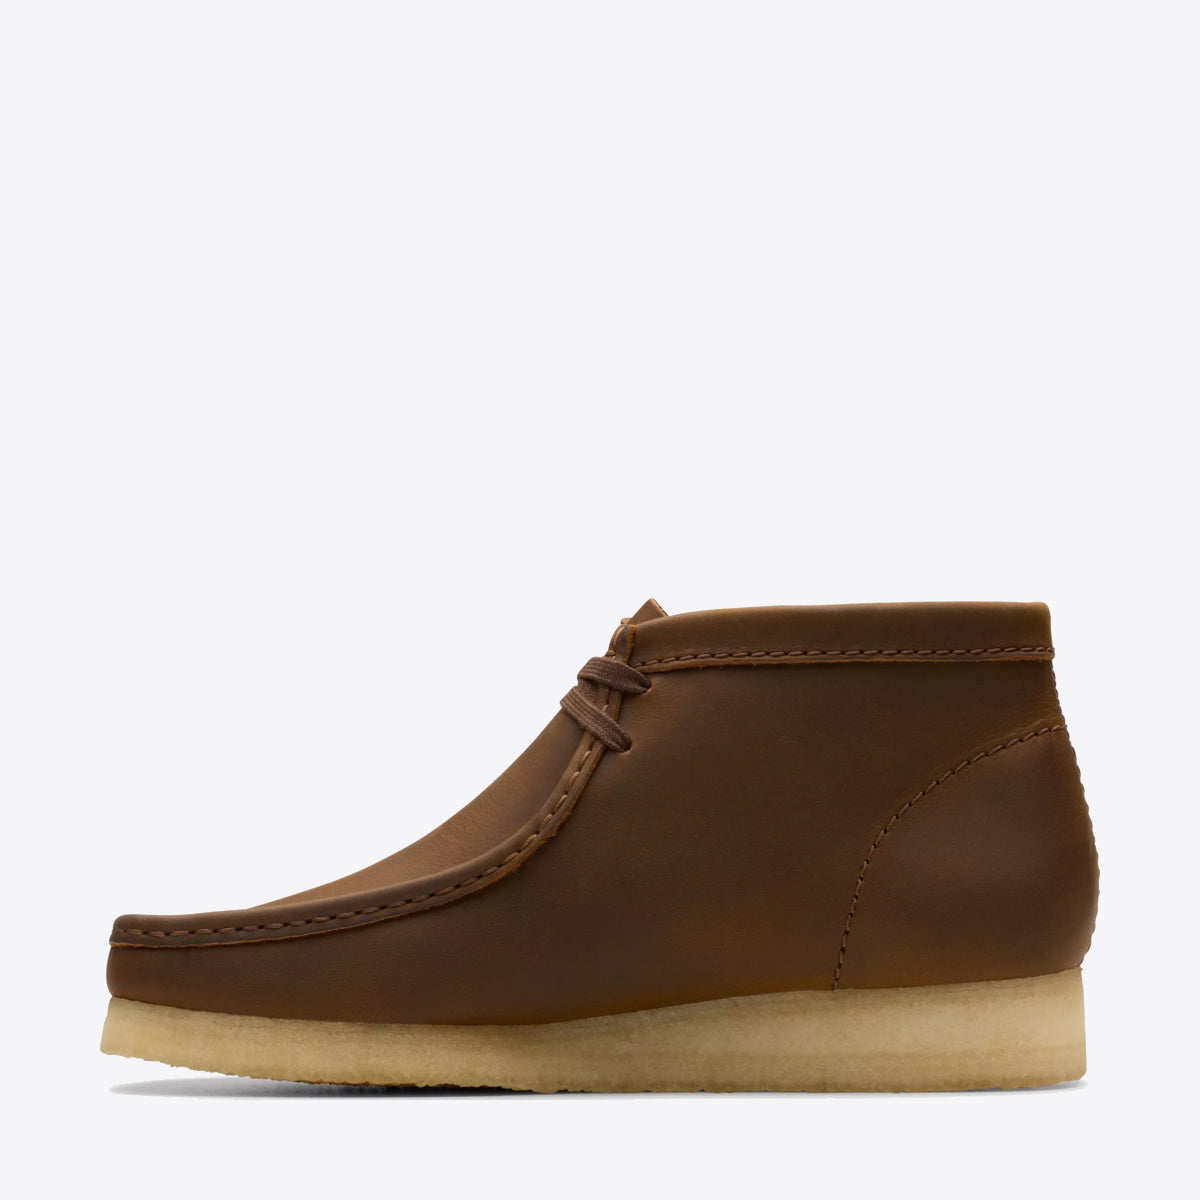 CLARKS Wallabee Boot Leather Beeswax - Image 2